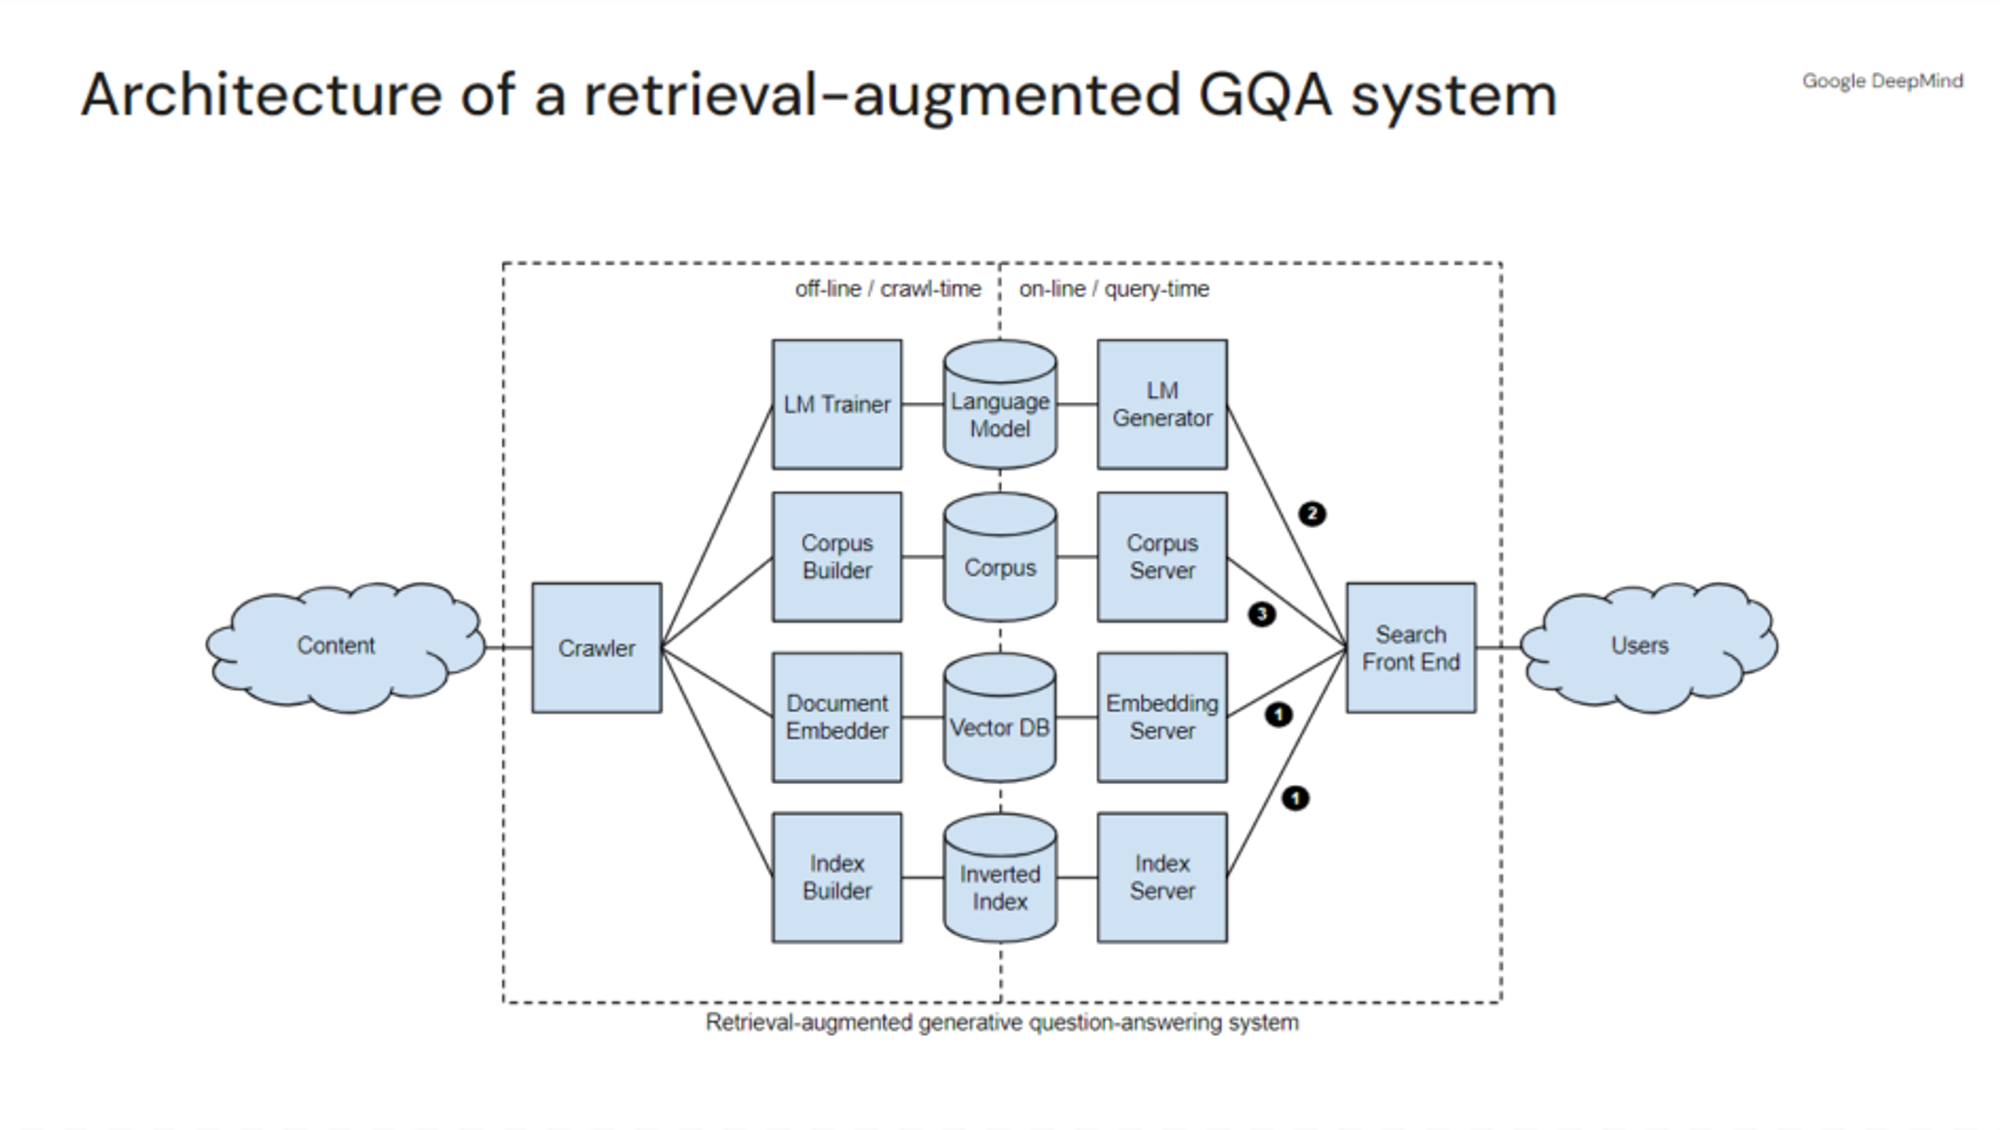 Architecture of a retrieval-augmented GQA system